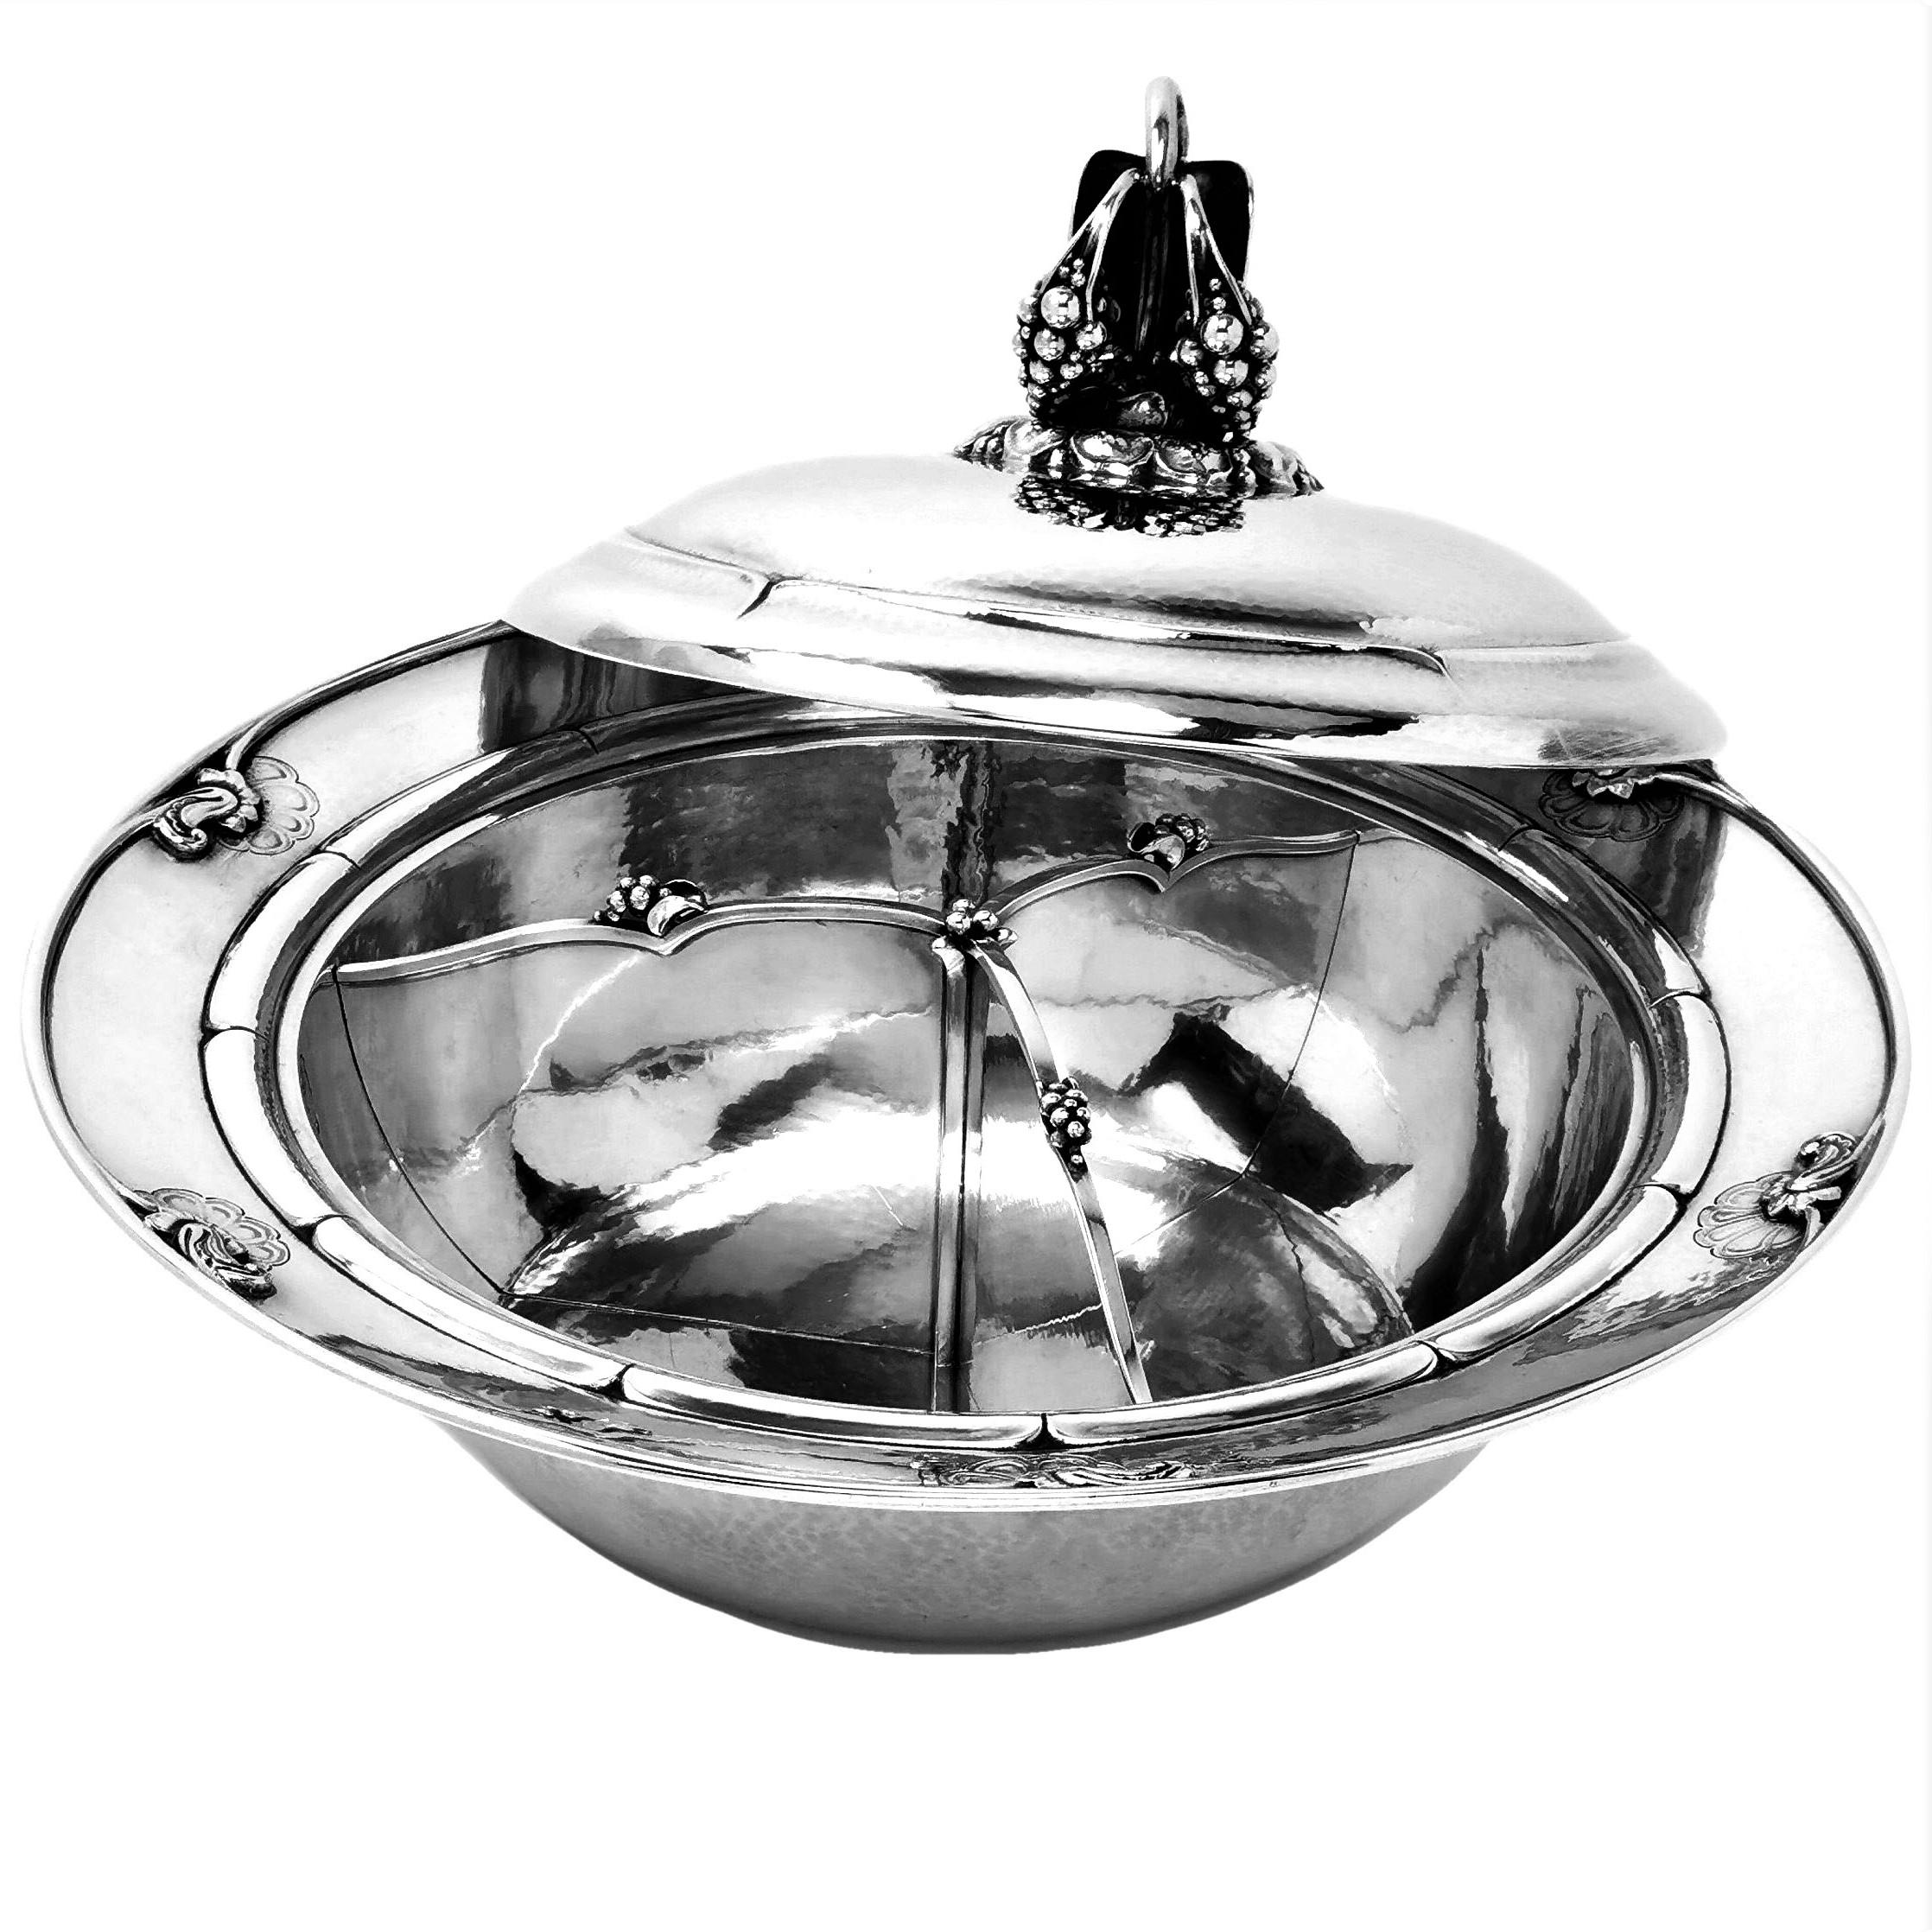 Georg Jensen Danish Sterling Silver Vegetable Tureen Dish & Cover 228H 1945-77 In Good Condition For Sale In London, GB